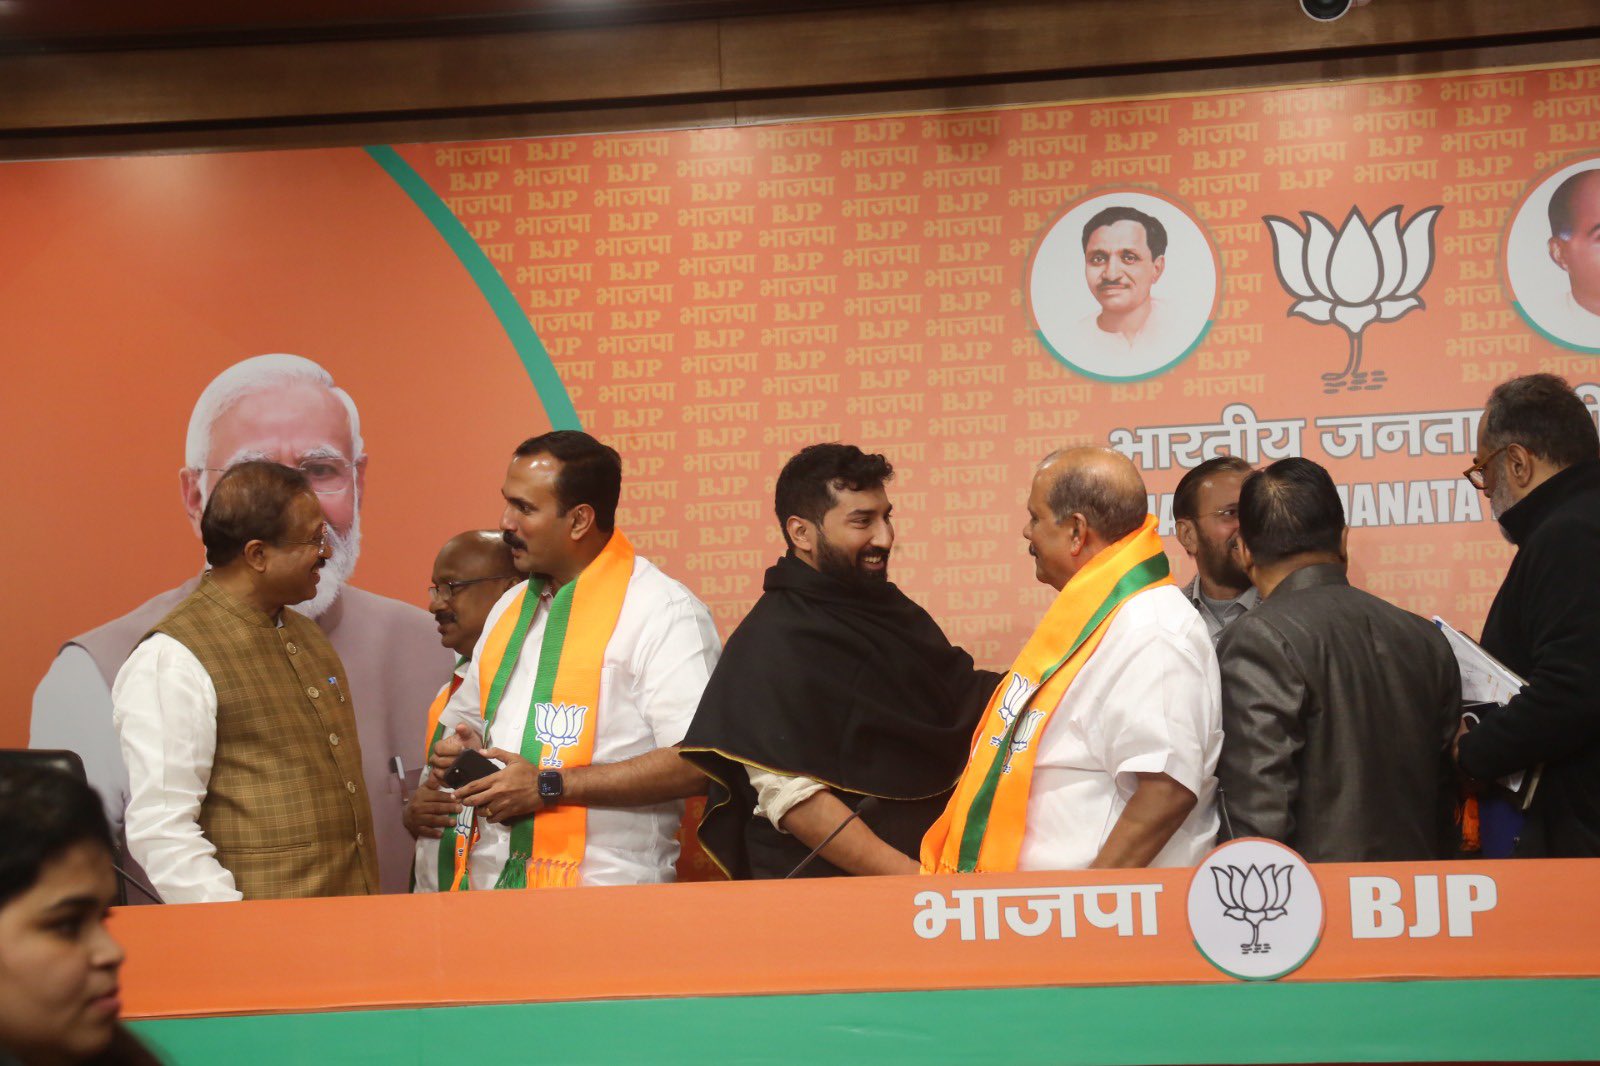 P C George and his son Shaun joining BJP in Delhi.